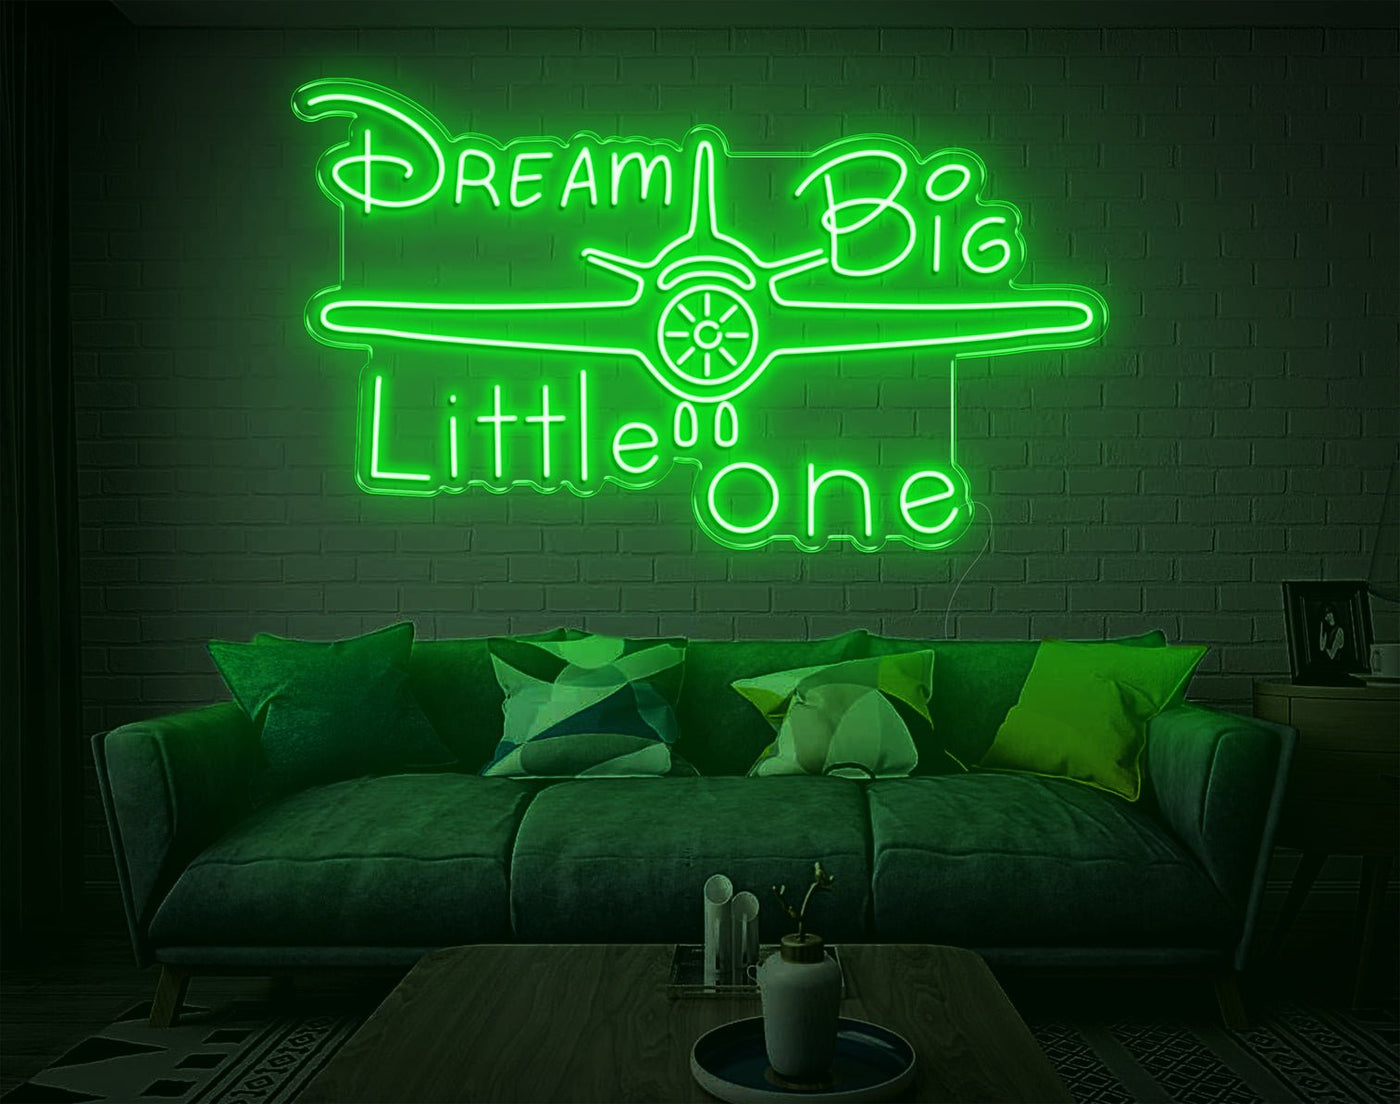 Dream Big Little One LED Neon Sign - 24inch x 42inchGreen